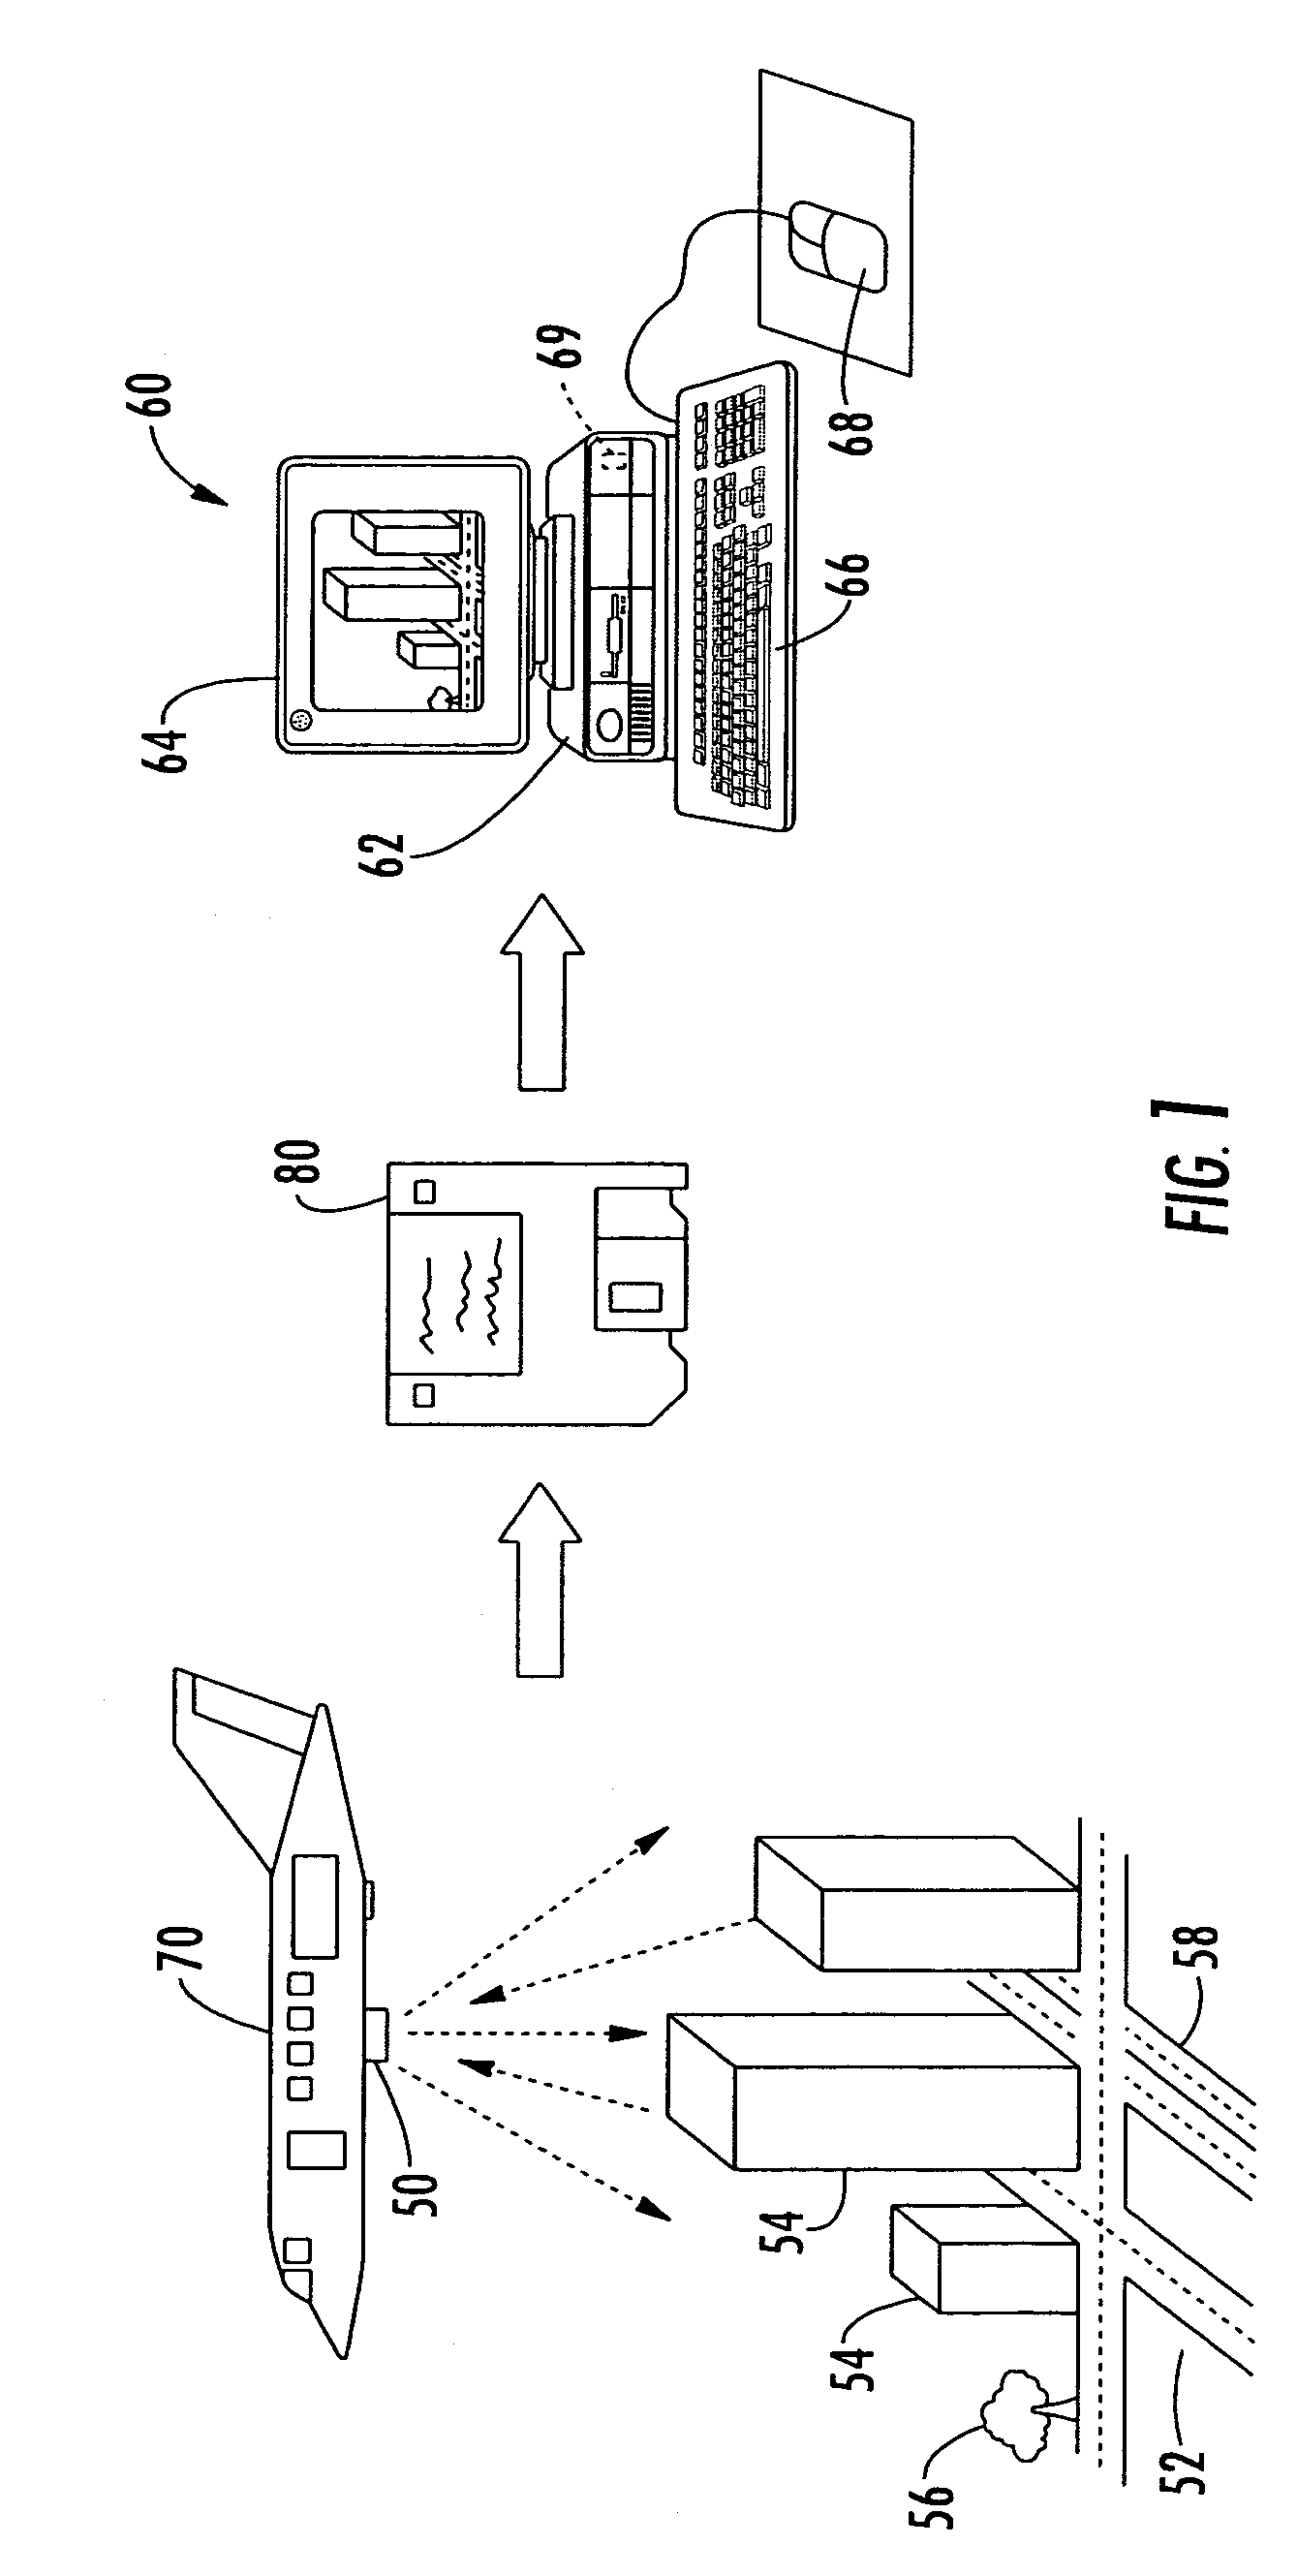 Method and apparatus for enhancing a digital elevation model (DEM) for topographical modeling